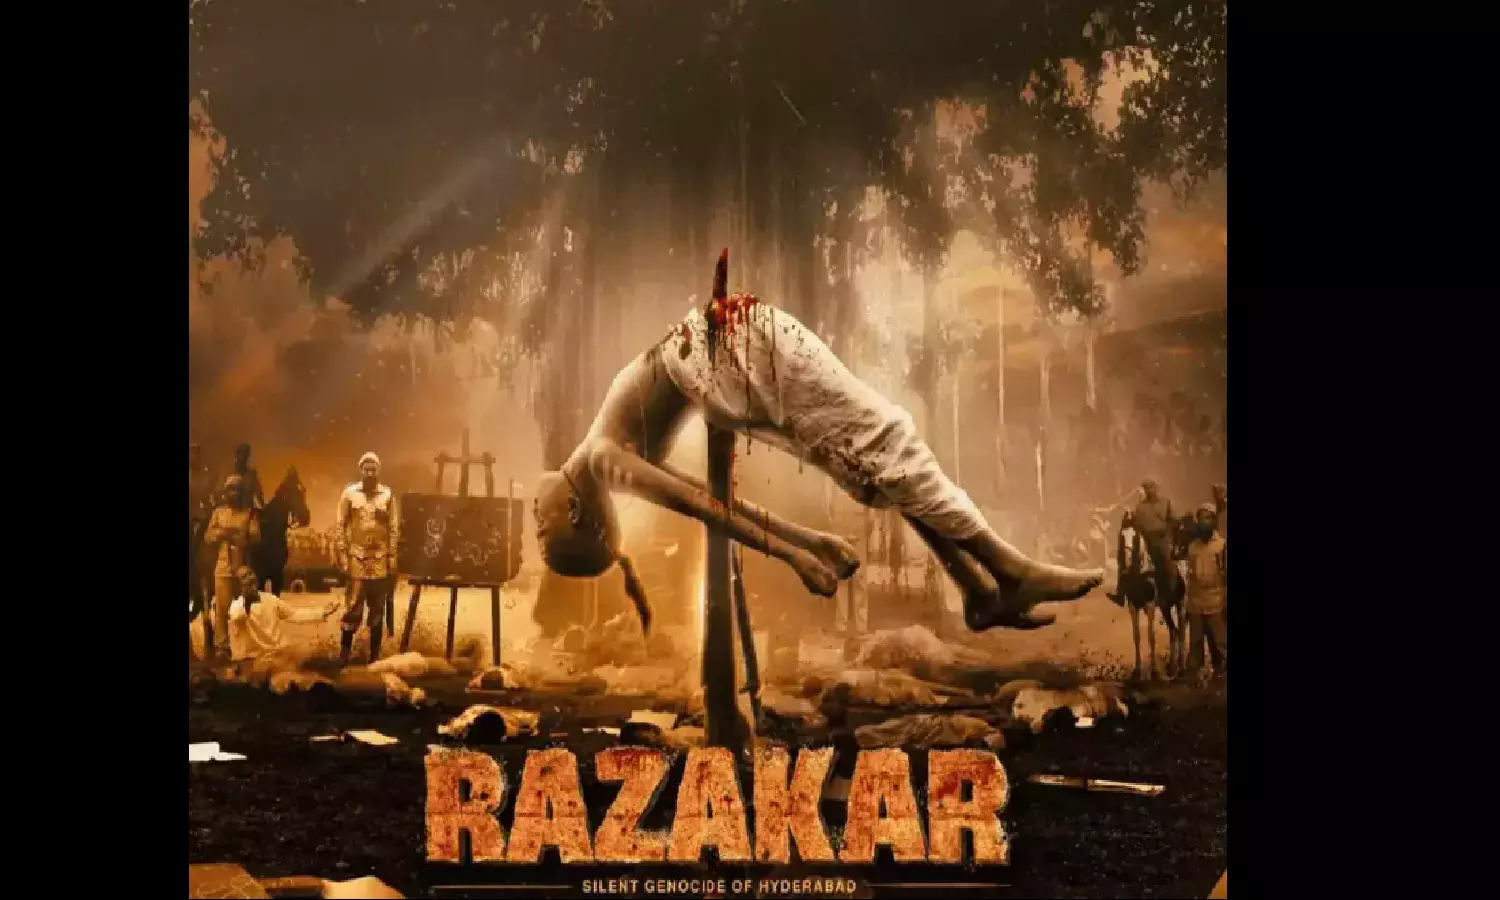 Razakar: The Silent Genocide of Hyderabad Story In Hindi